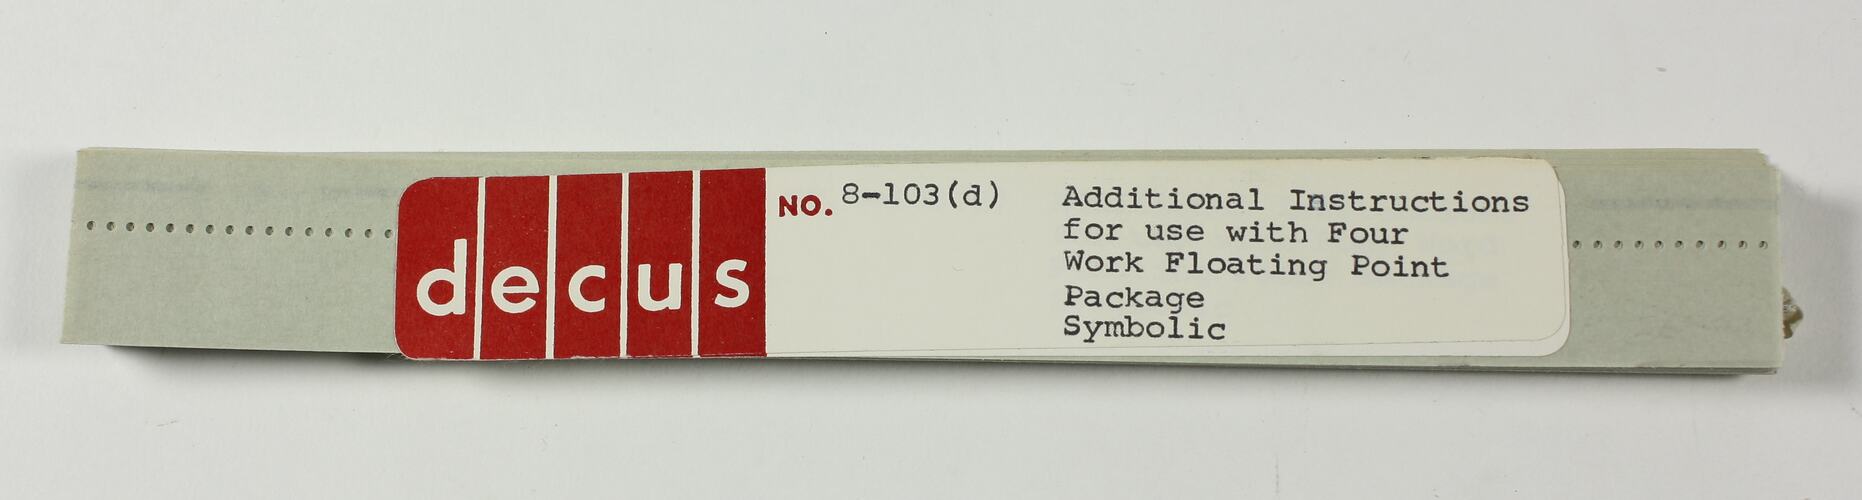 Paper Tape - DECUS, '8-103d Additional Instructions for Use with Four Word Floating Point Package, Symbolic'